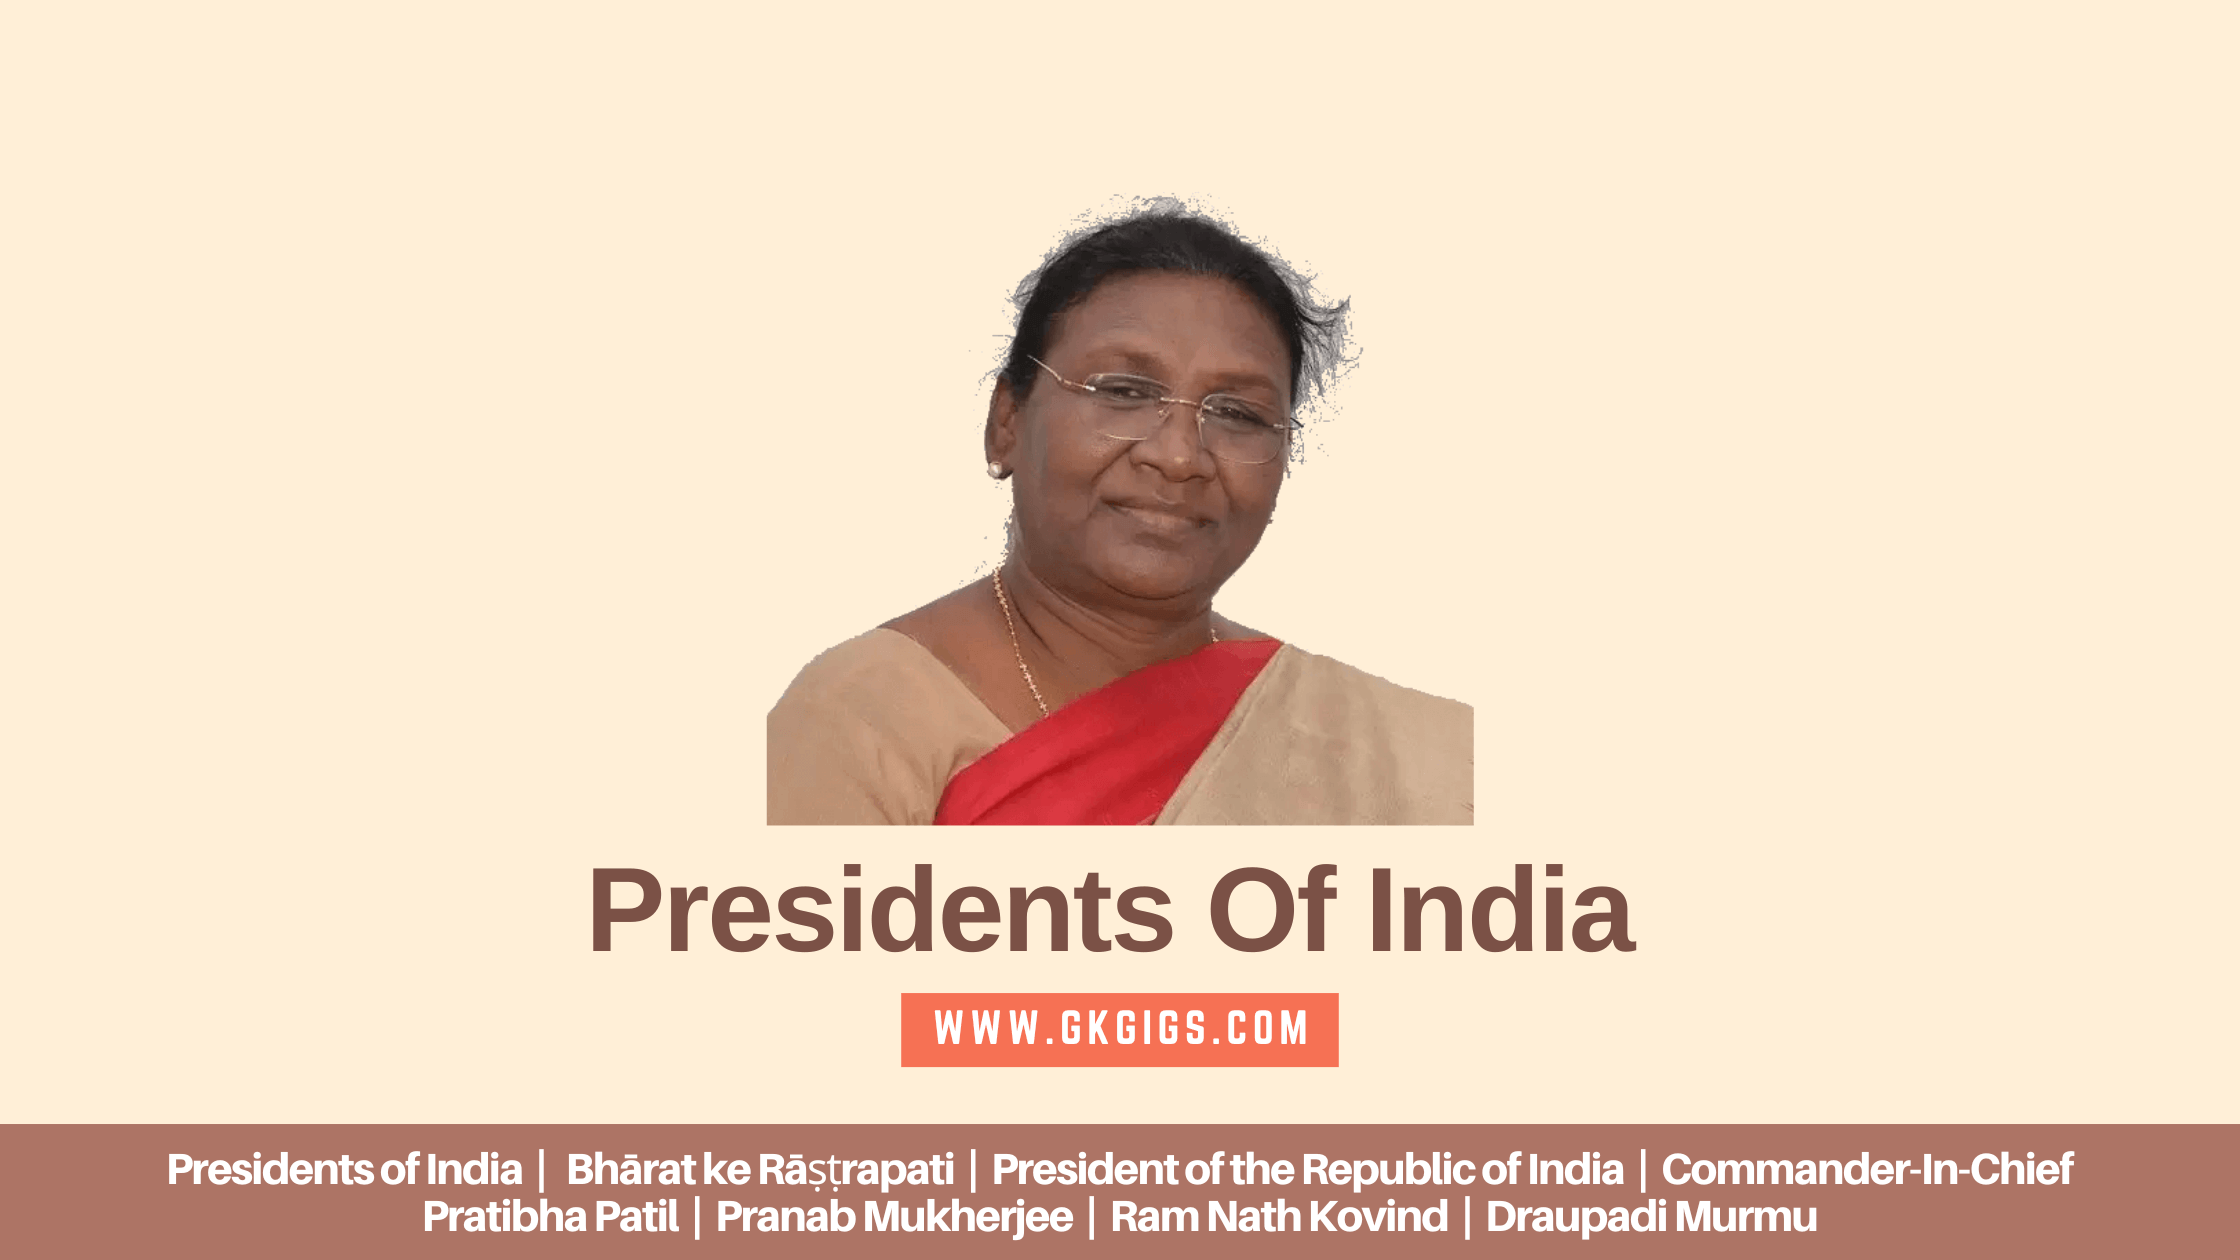 List Of All Presidents Of India From 1950 To 2023 GkGigs